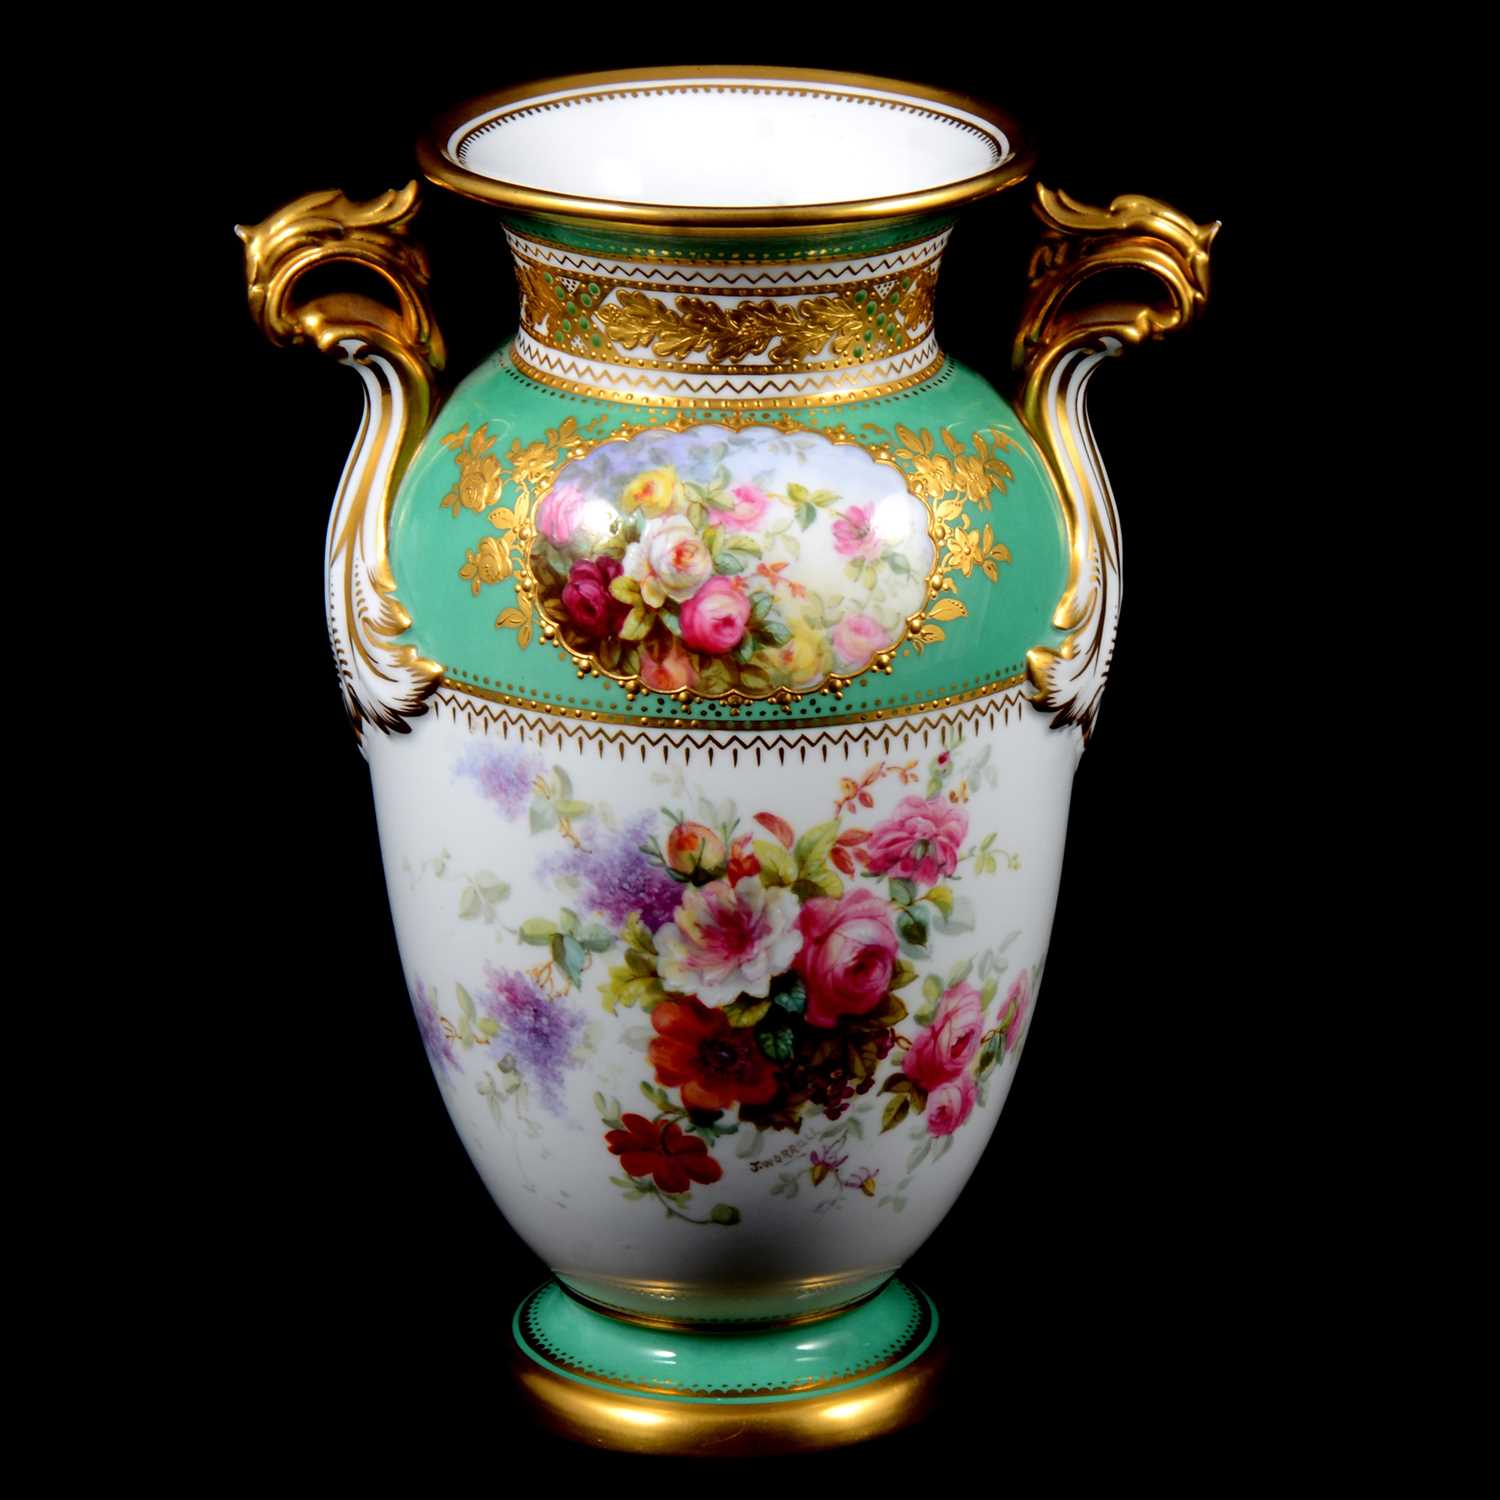 Spode Copeland cabinet vase, painted by J Worrall